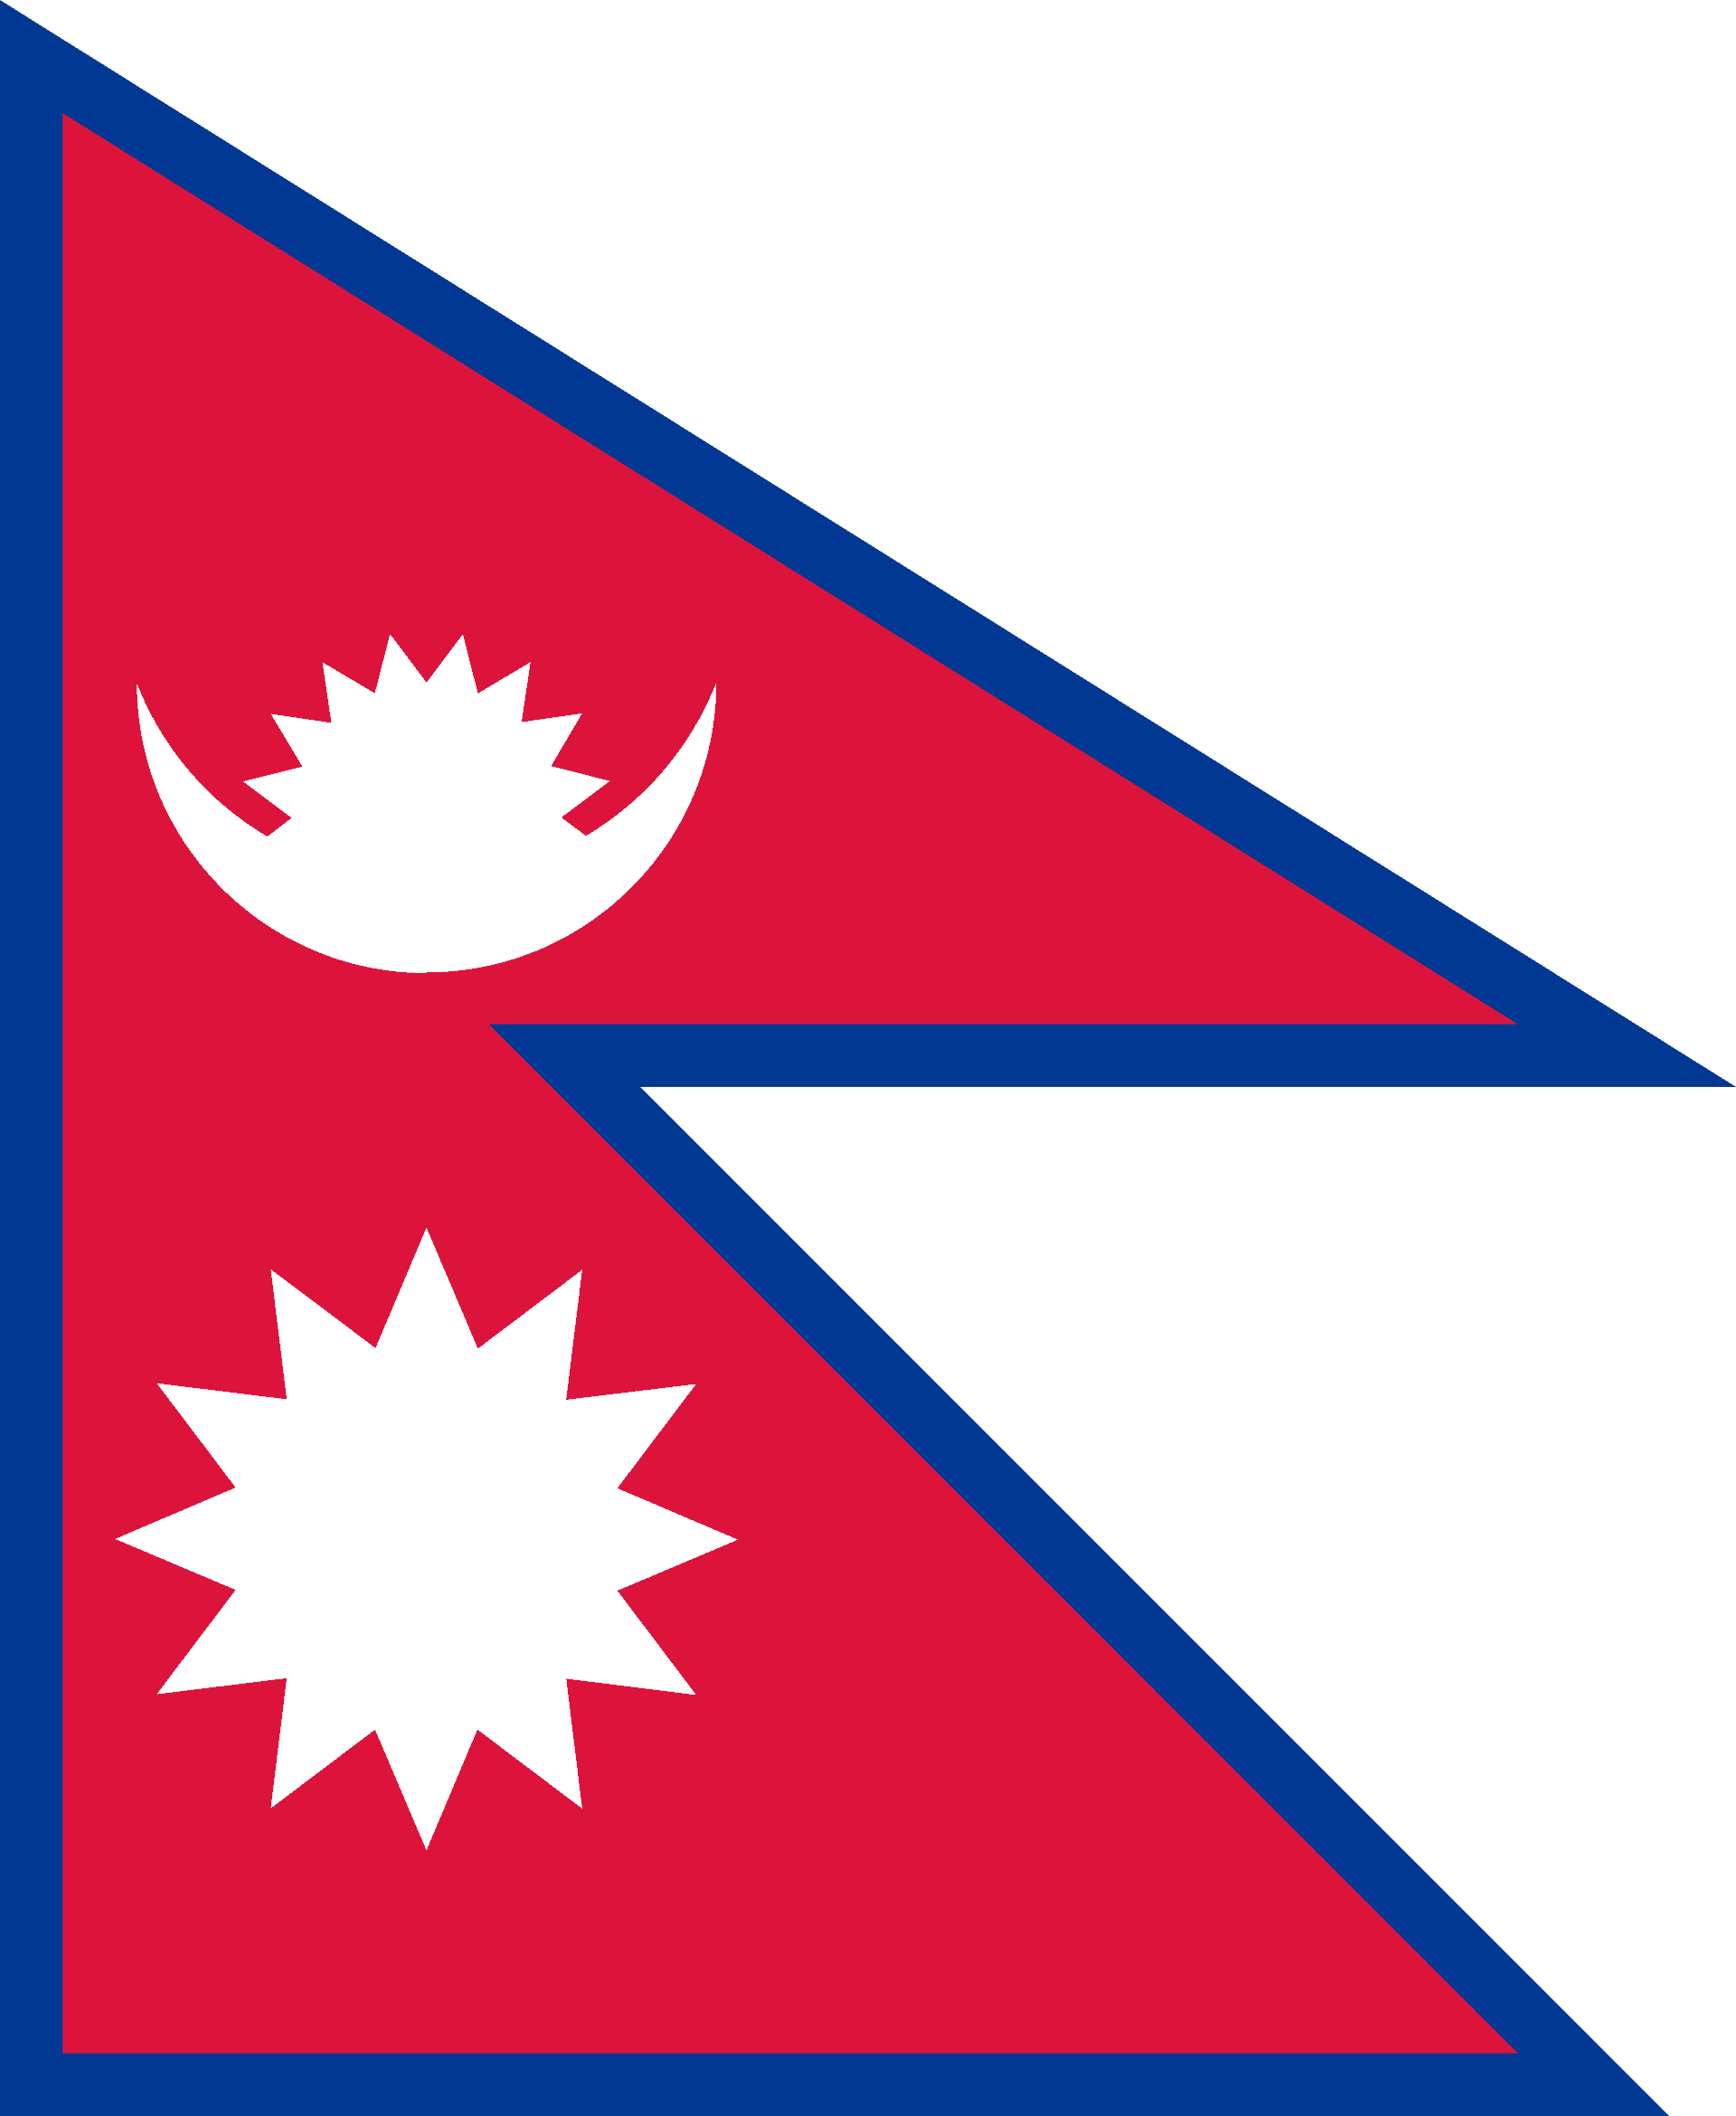 Drone Laws in Nepal